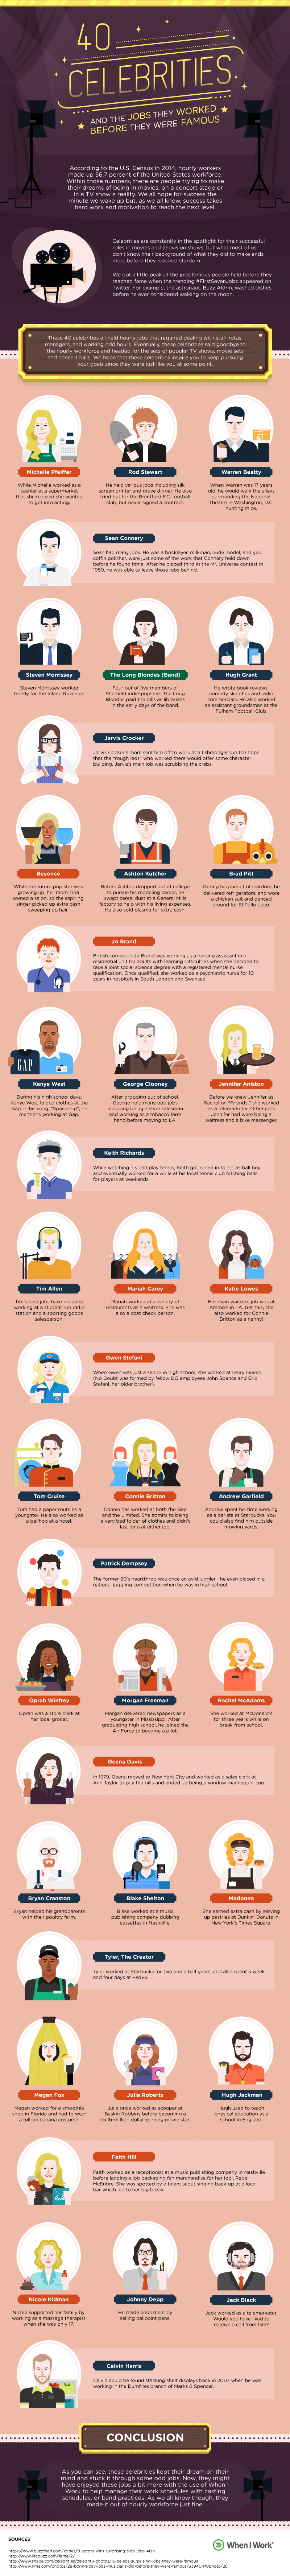 Infographic for 40 Celebrities and The Jobs They Worked Before Fame